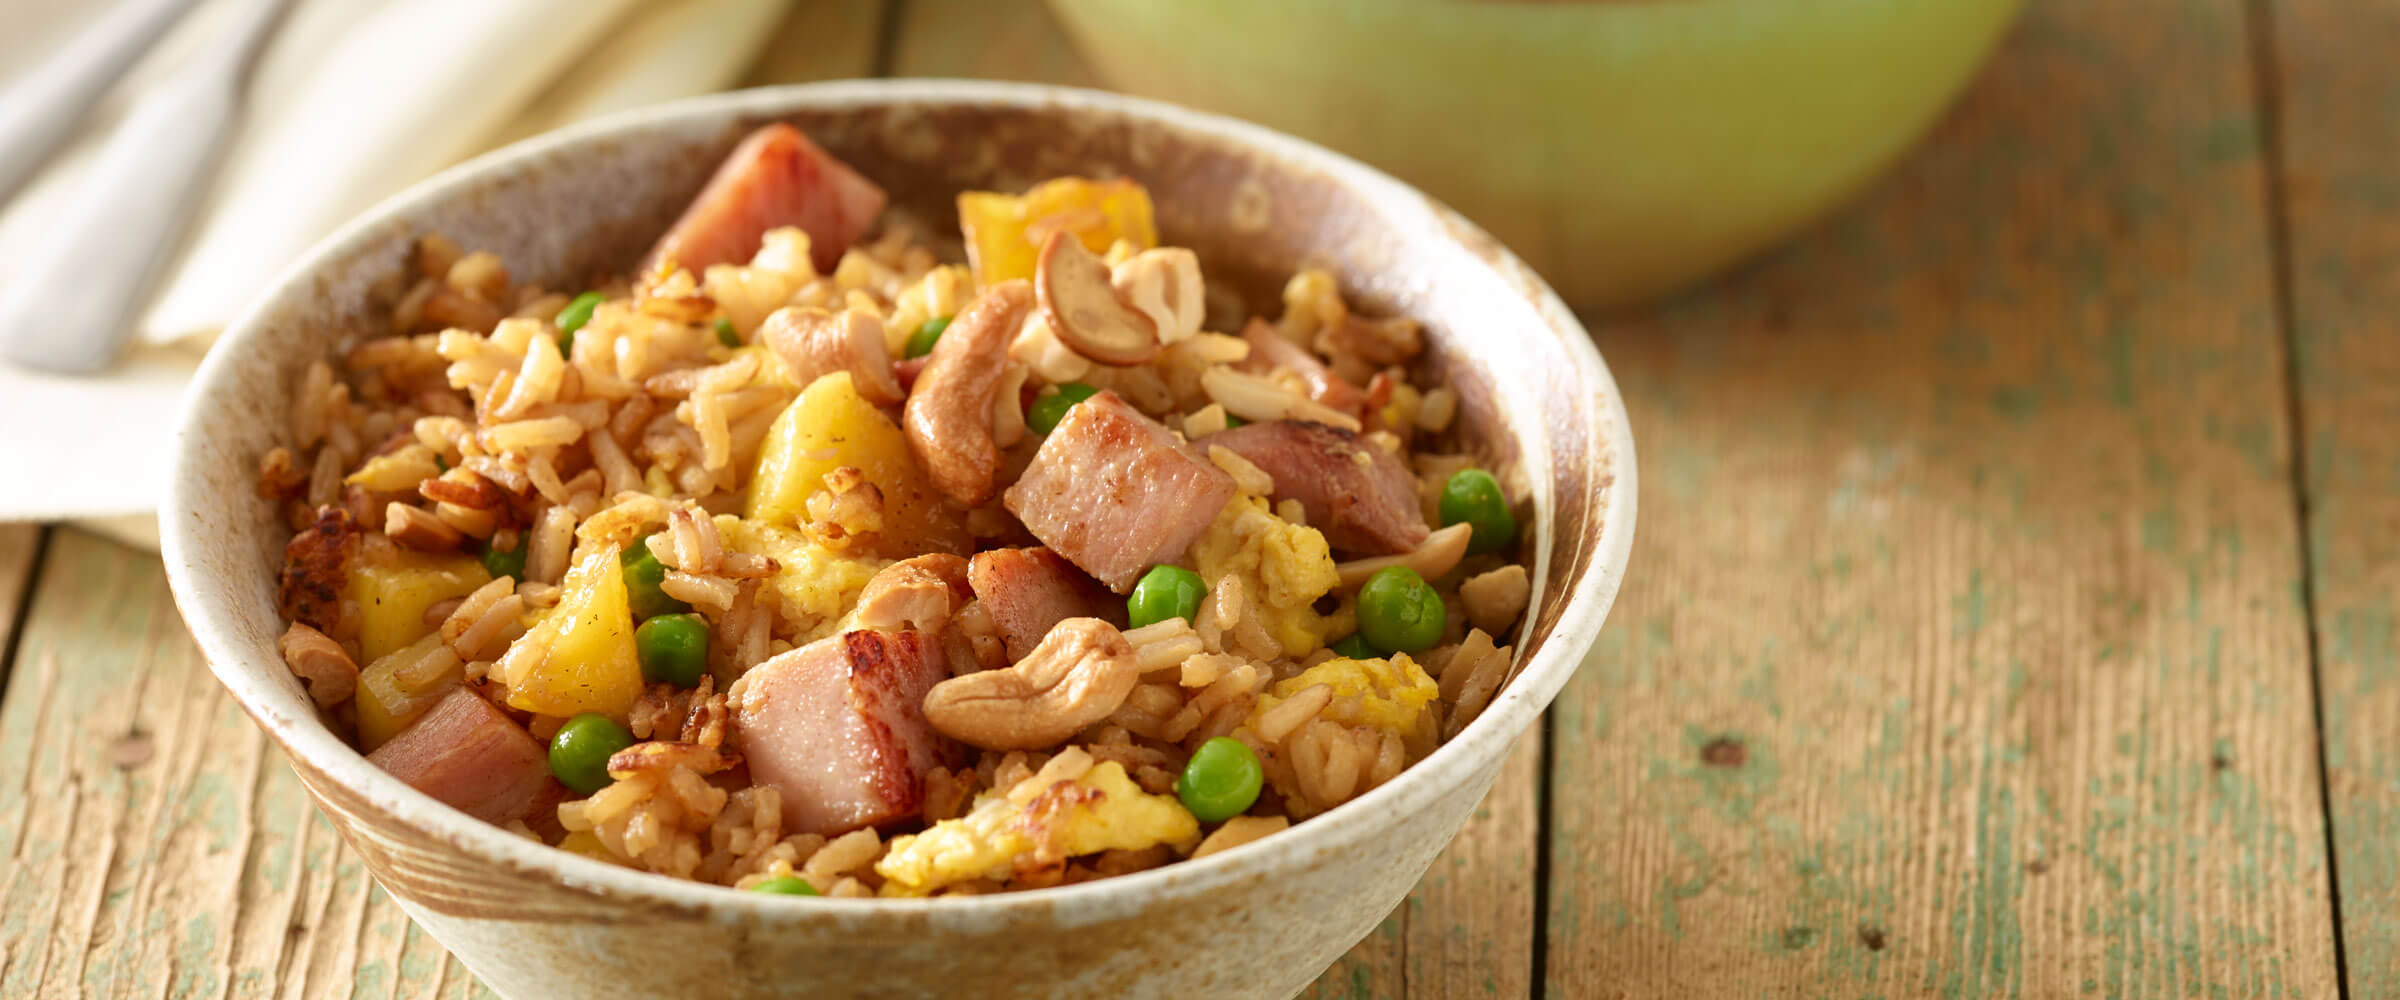 Ham and Pineapple Fried Rice in bowl on wood table